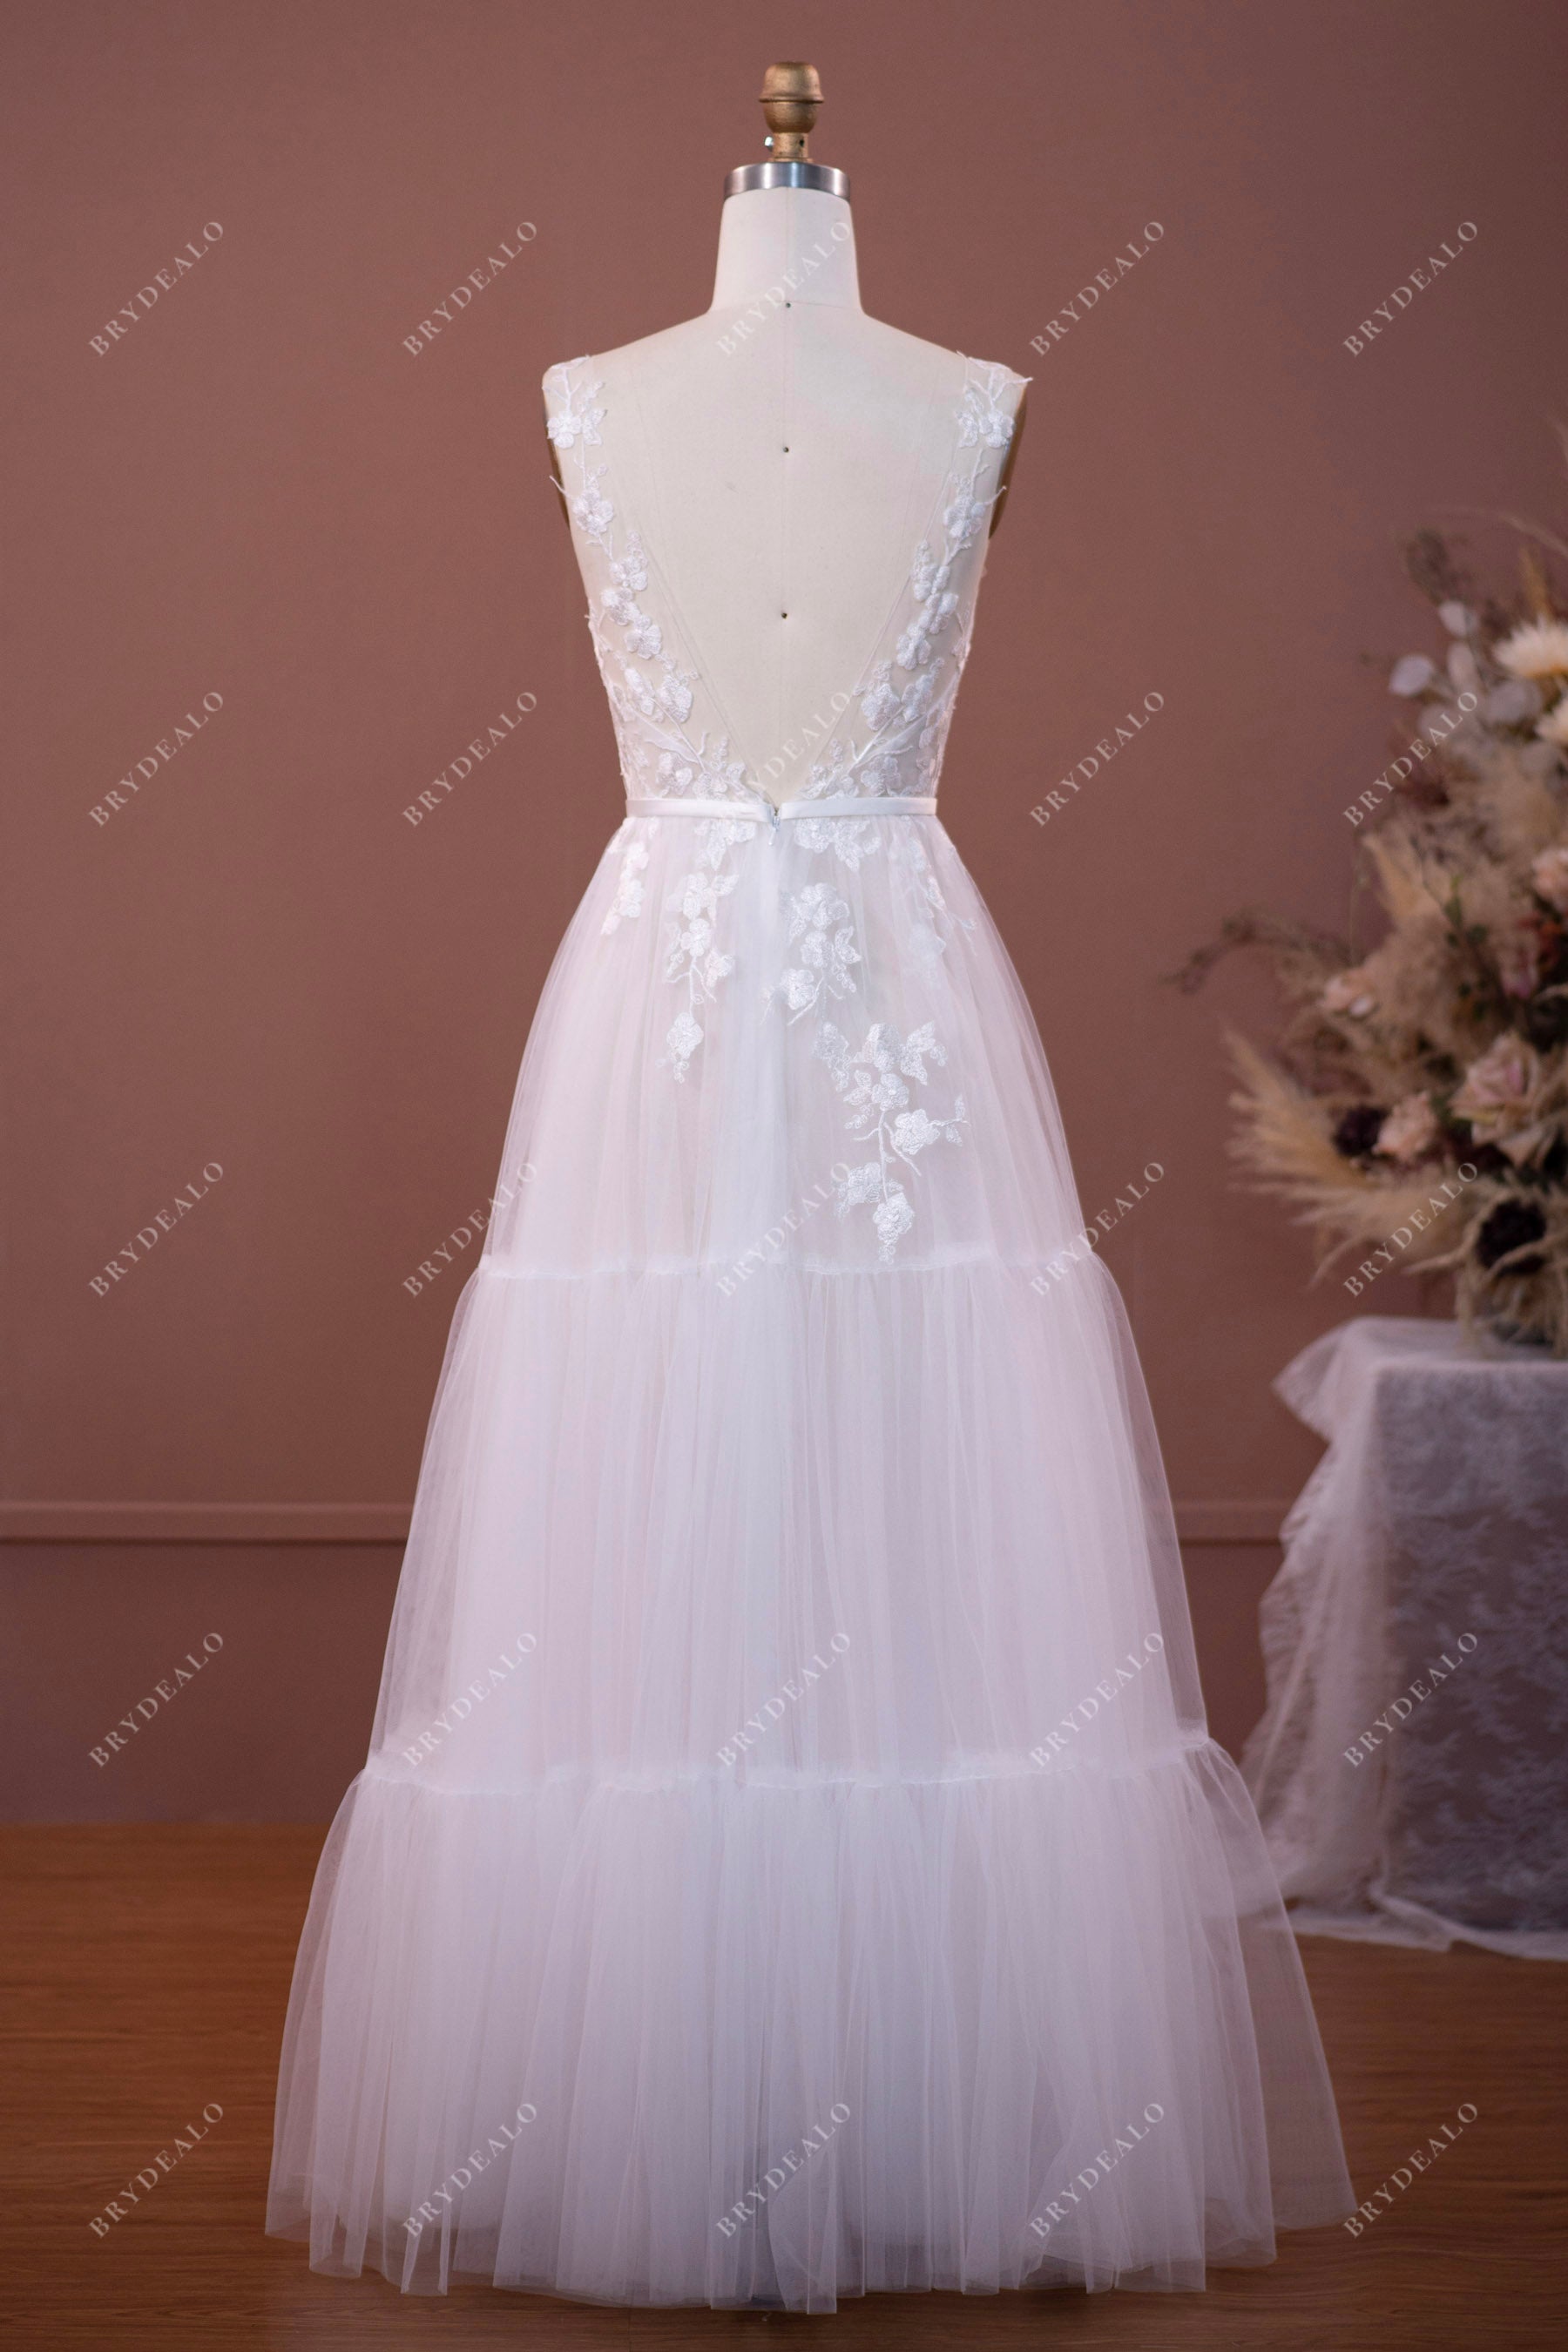 Illusion Lace Tulle Open Back Beach Wedding Dress